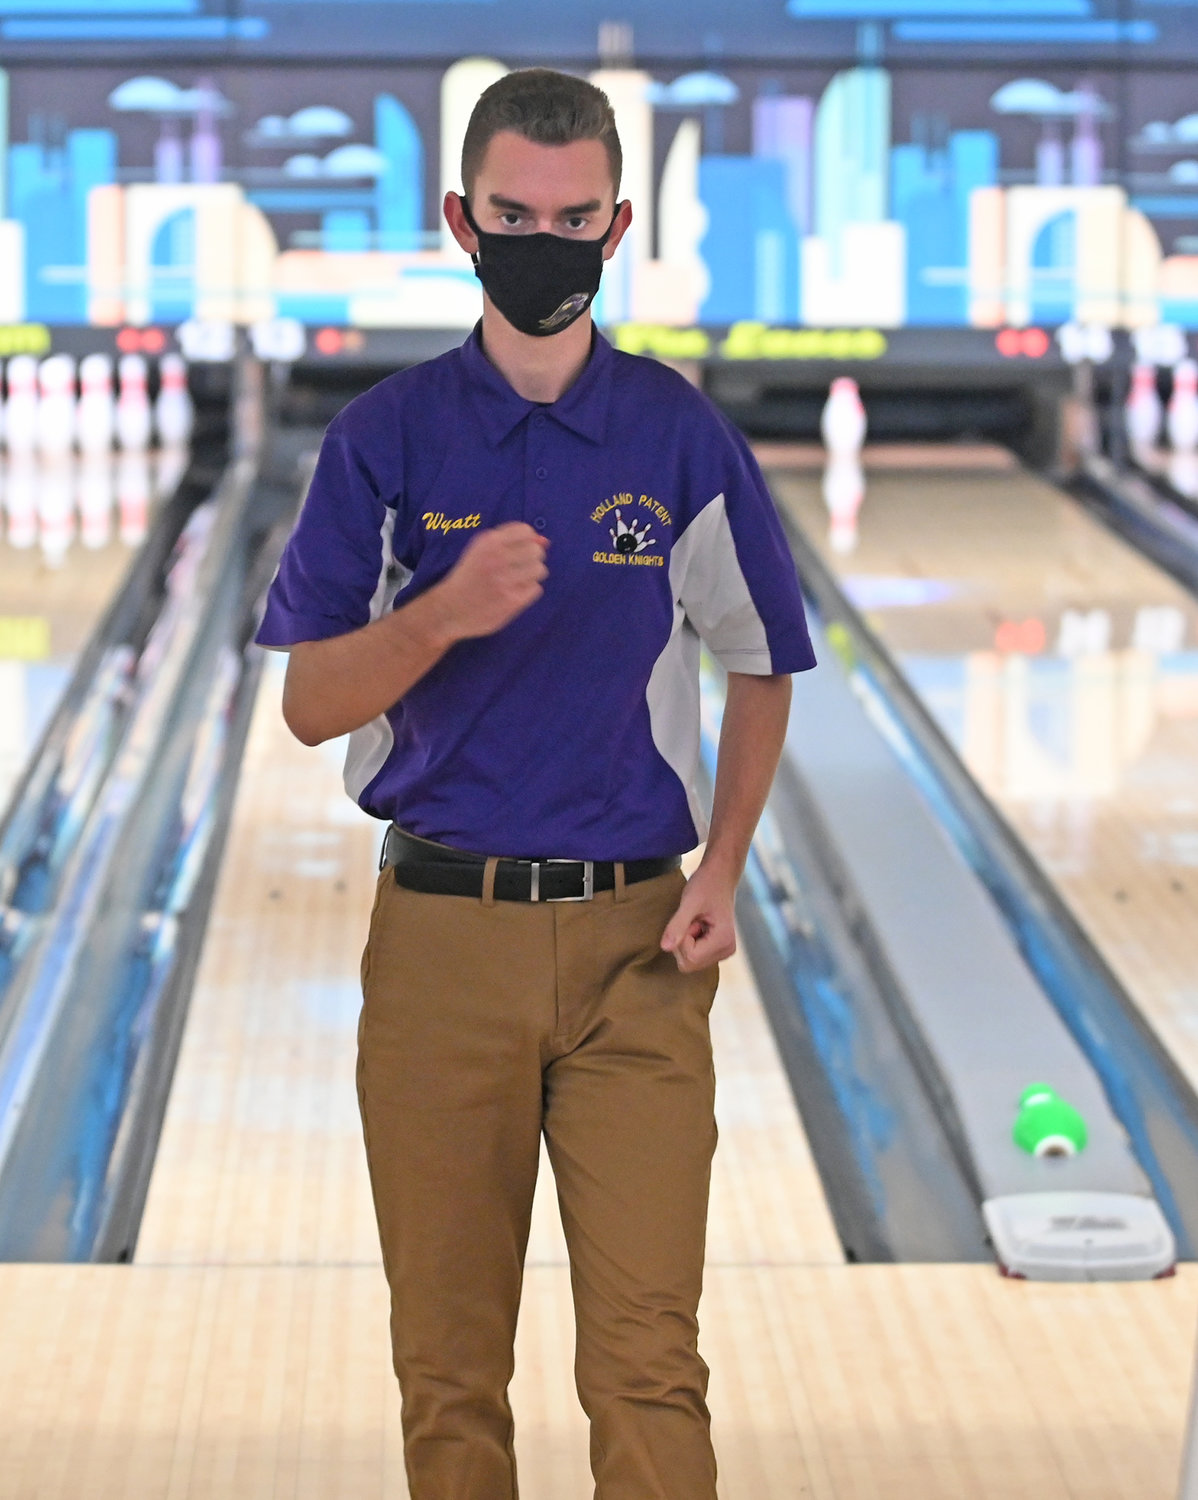 STRIKE — Wyatt Humpf reacts to his strike bowled in the first game, first frame Thursday at King Pin Lanes against Herkimer. The senior at Holland Patent is a co-captain in his fifth year with the team.